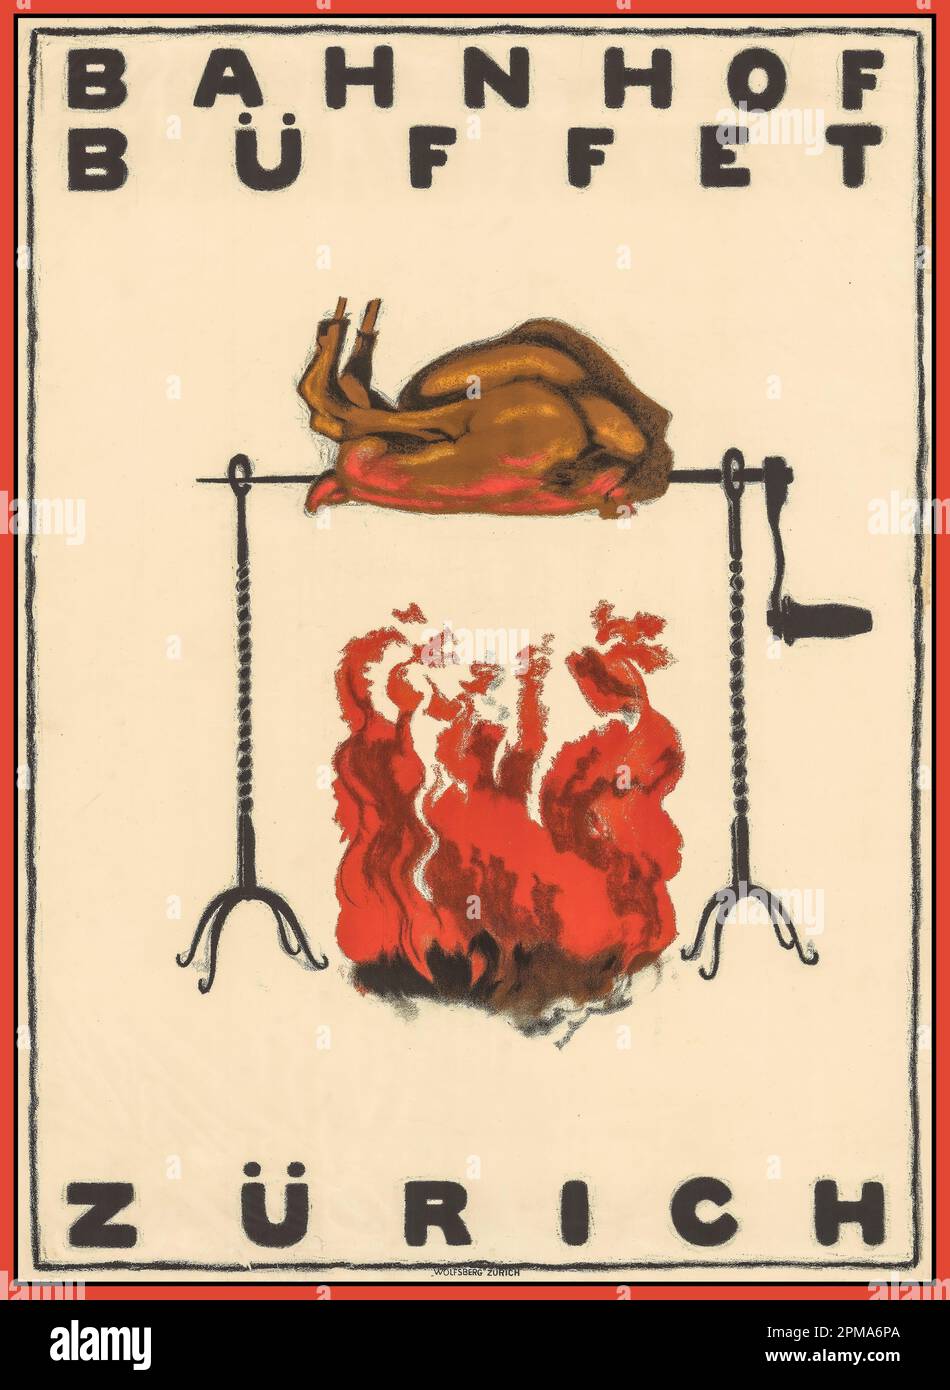 Vintage 1920's Railway Station Buffet Food Poster Lithograph Zurich train station buffet with a chicken on an open Rotisserie fire by Augusto Giacometti  (1877–1947)  BAHNHOF BUFFET ZURICH 1921 Stock Photo